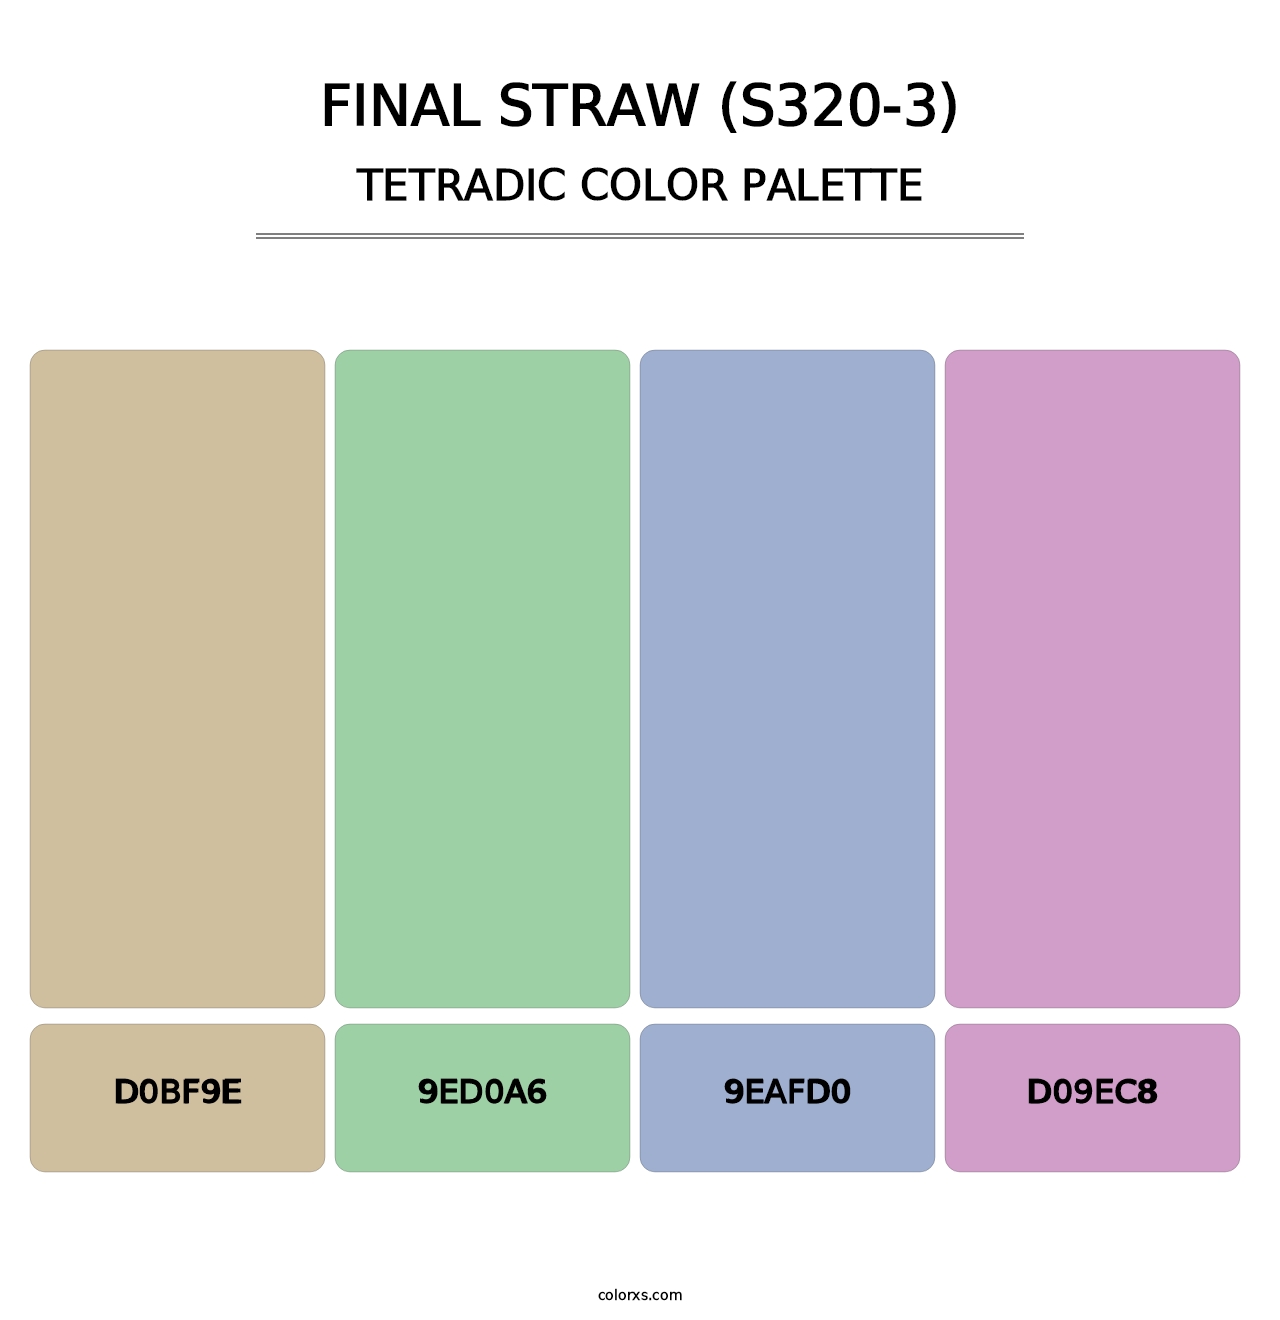 Final Straw (S320-3) - Tetradic Color Palette